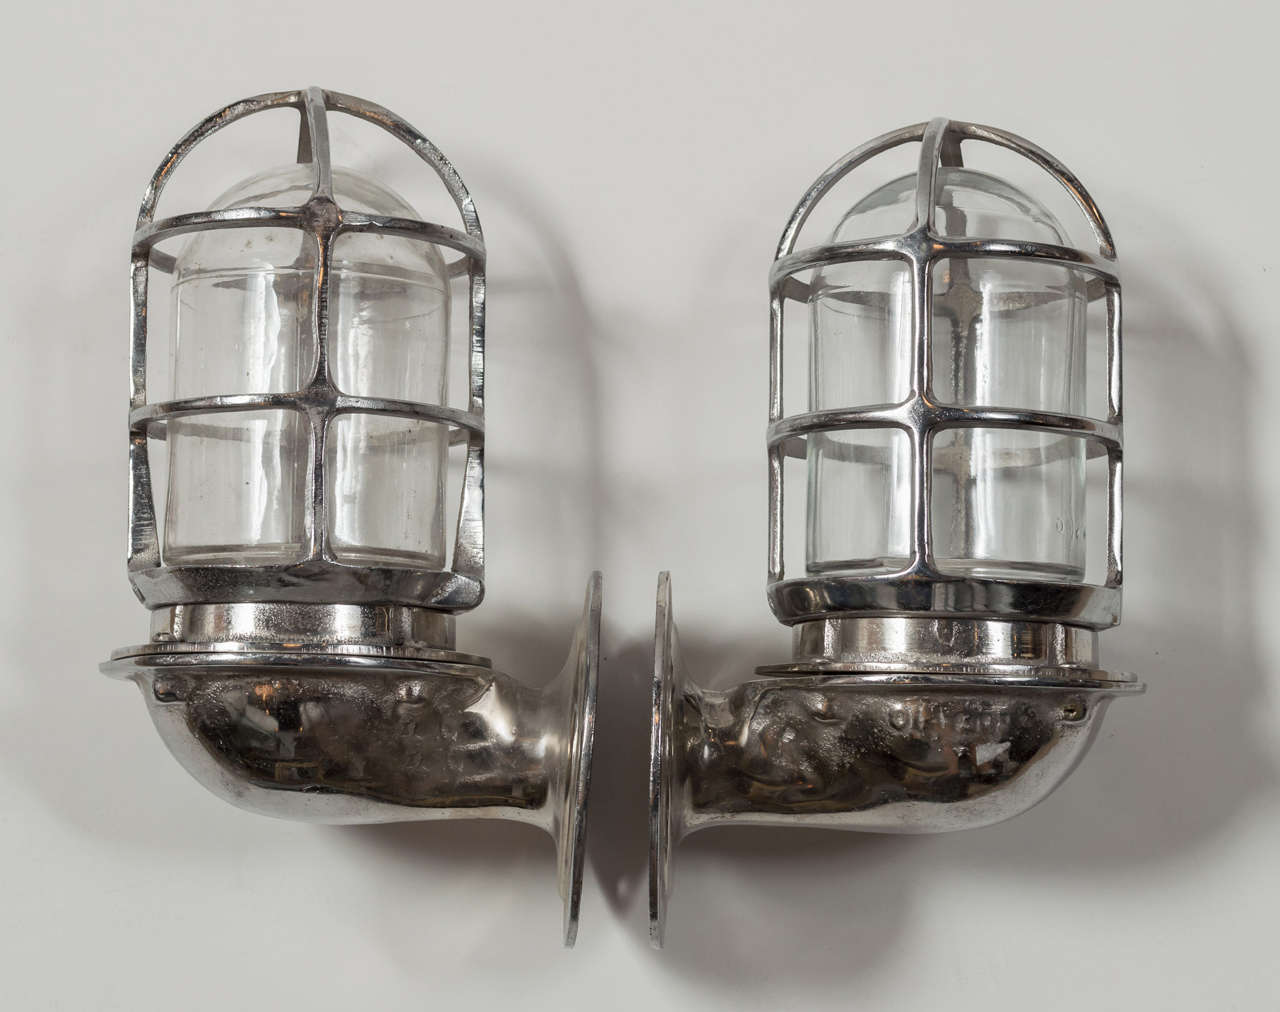 Pair of maritime sconces from France, circa the 1920s. Glass globe with metal cage, wall mounts are circular with a 4.5